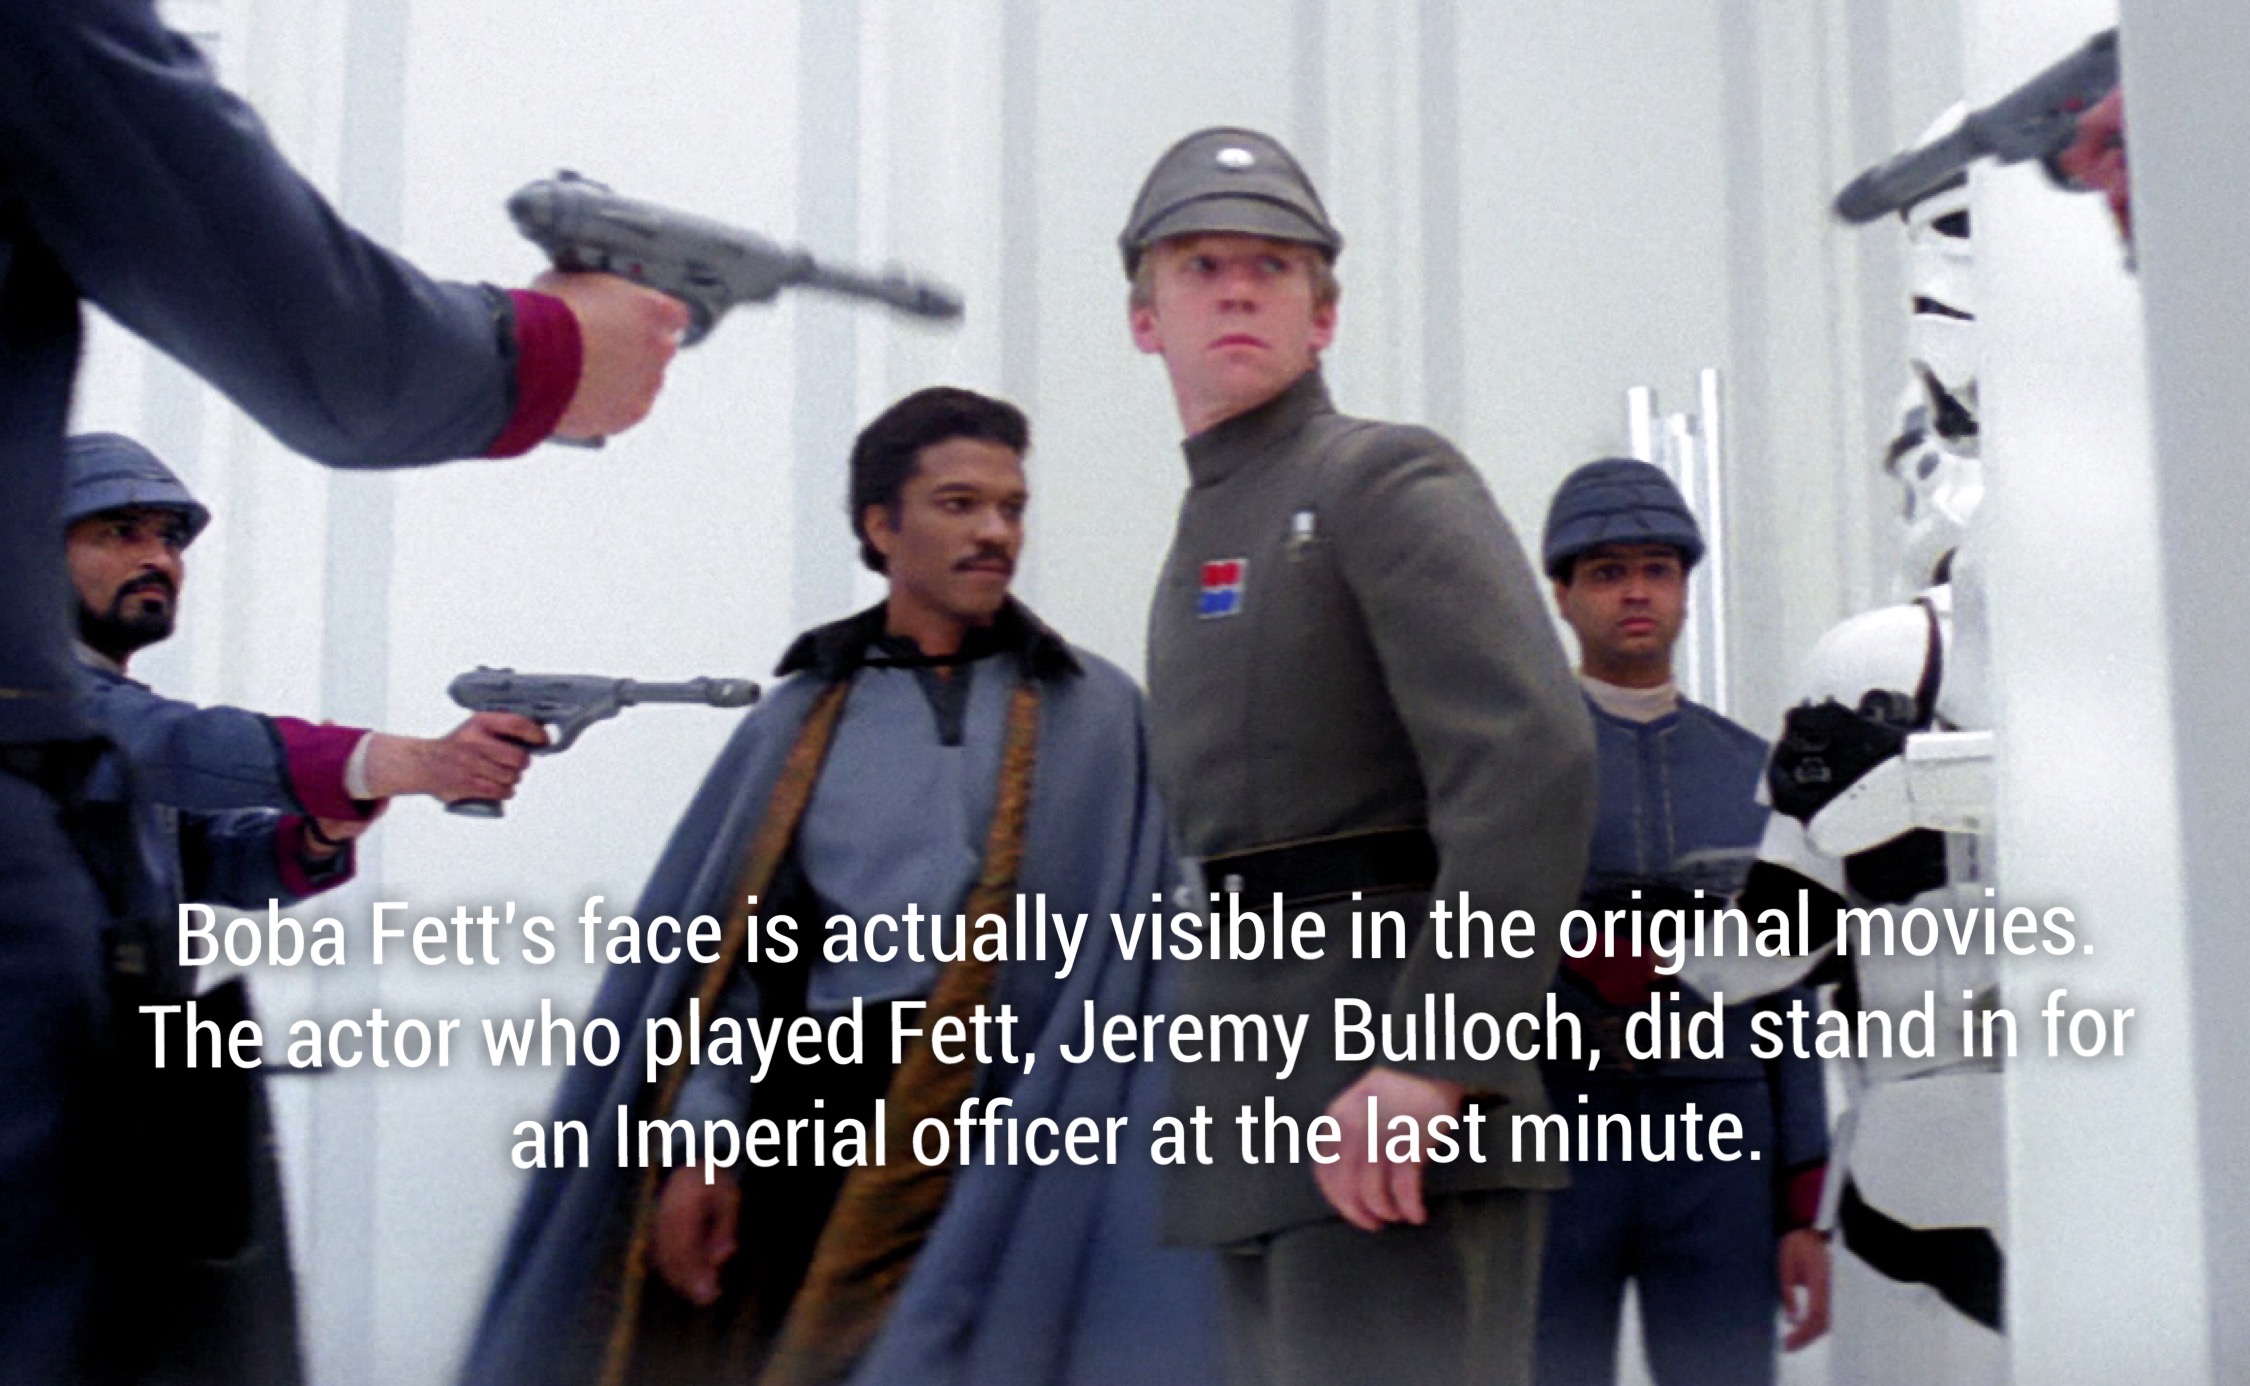 utris m toc - Boba Fett's face is actually visible in the original movies. The actor who played Fett, Jeremy Bulloch, did stand in for an Imperial officer at the last minute.